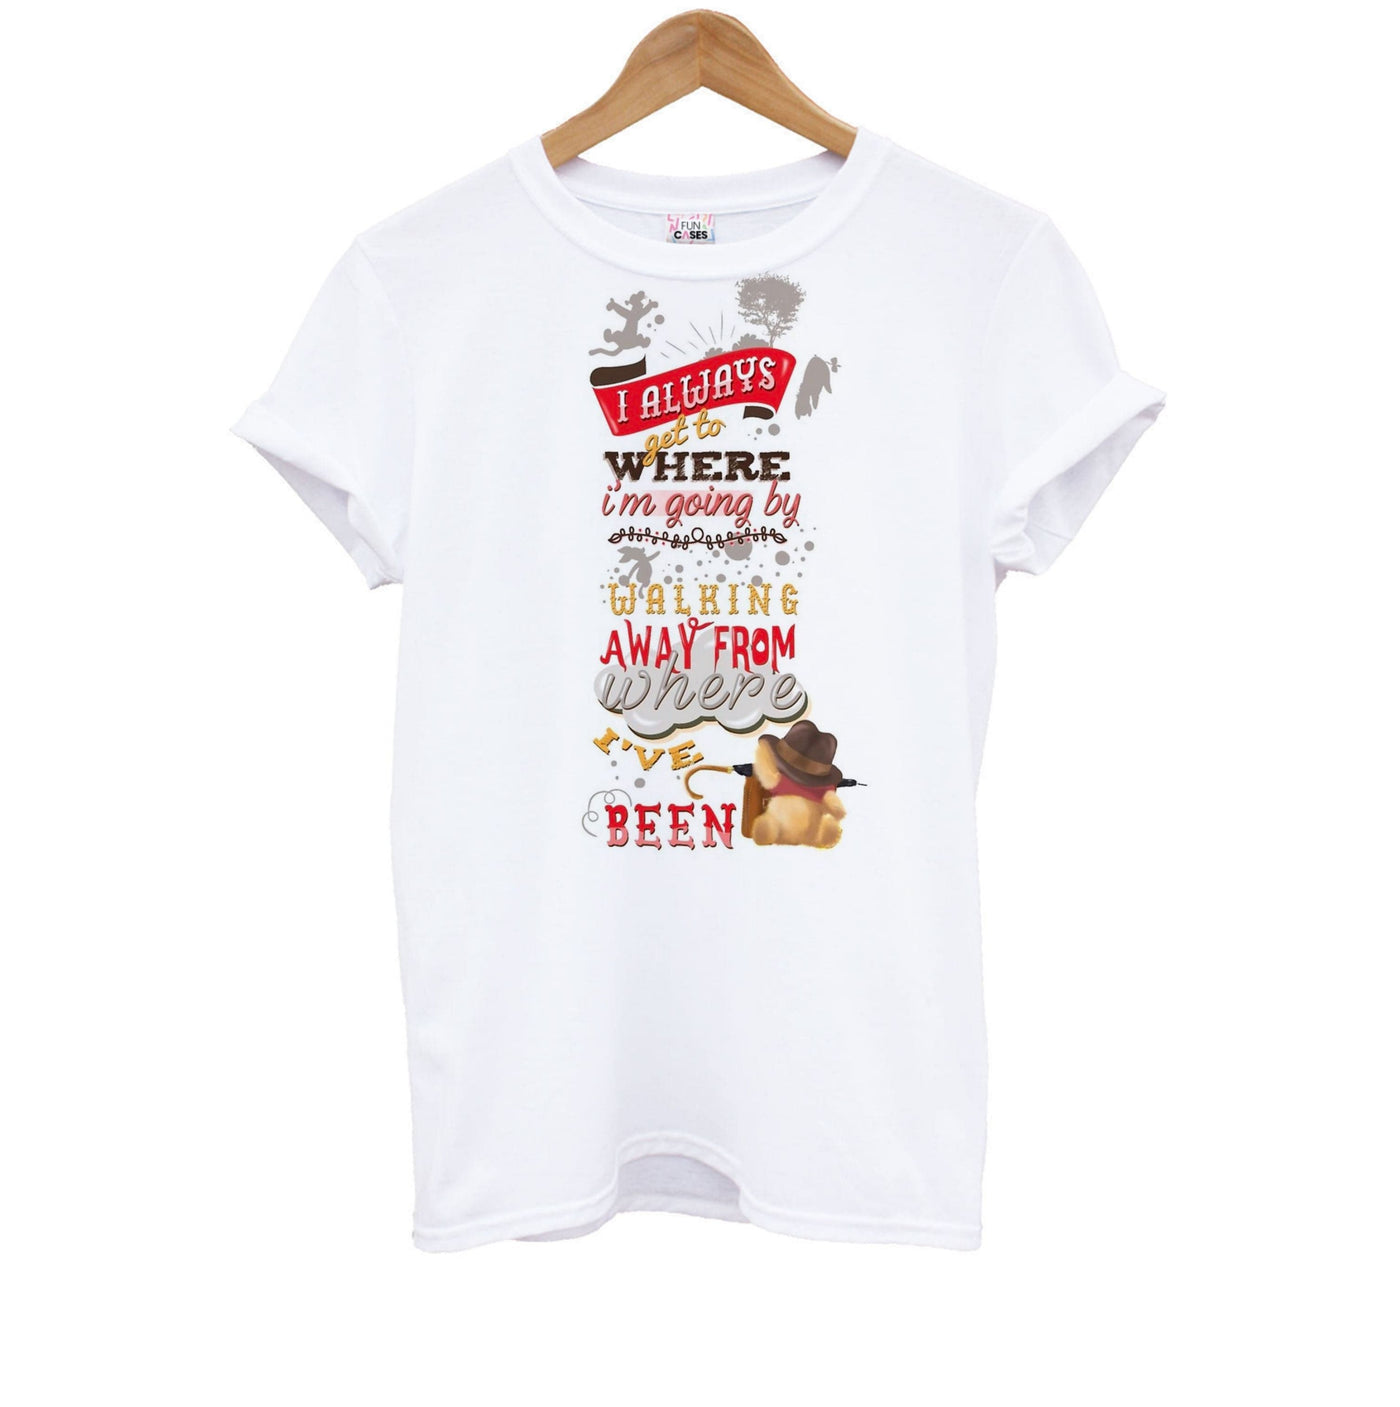 I Always Get Where I'm Going - Winnie The Pooh Quote Kids T-Shirt